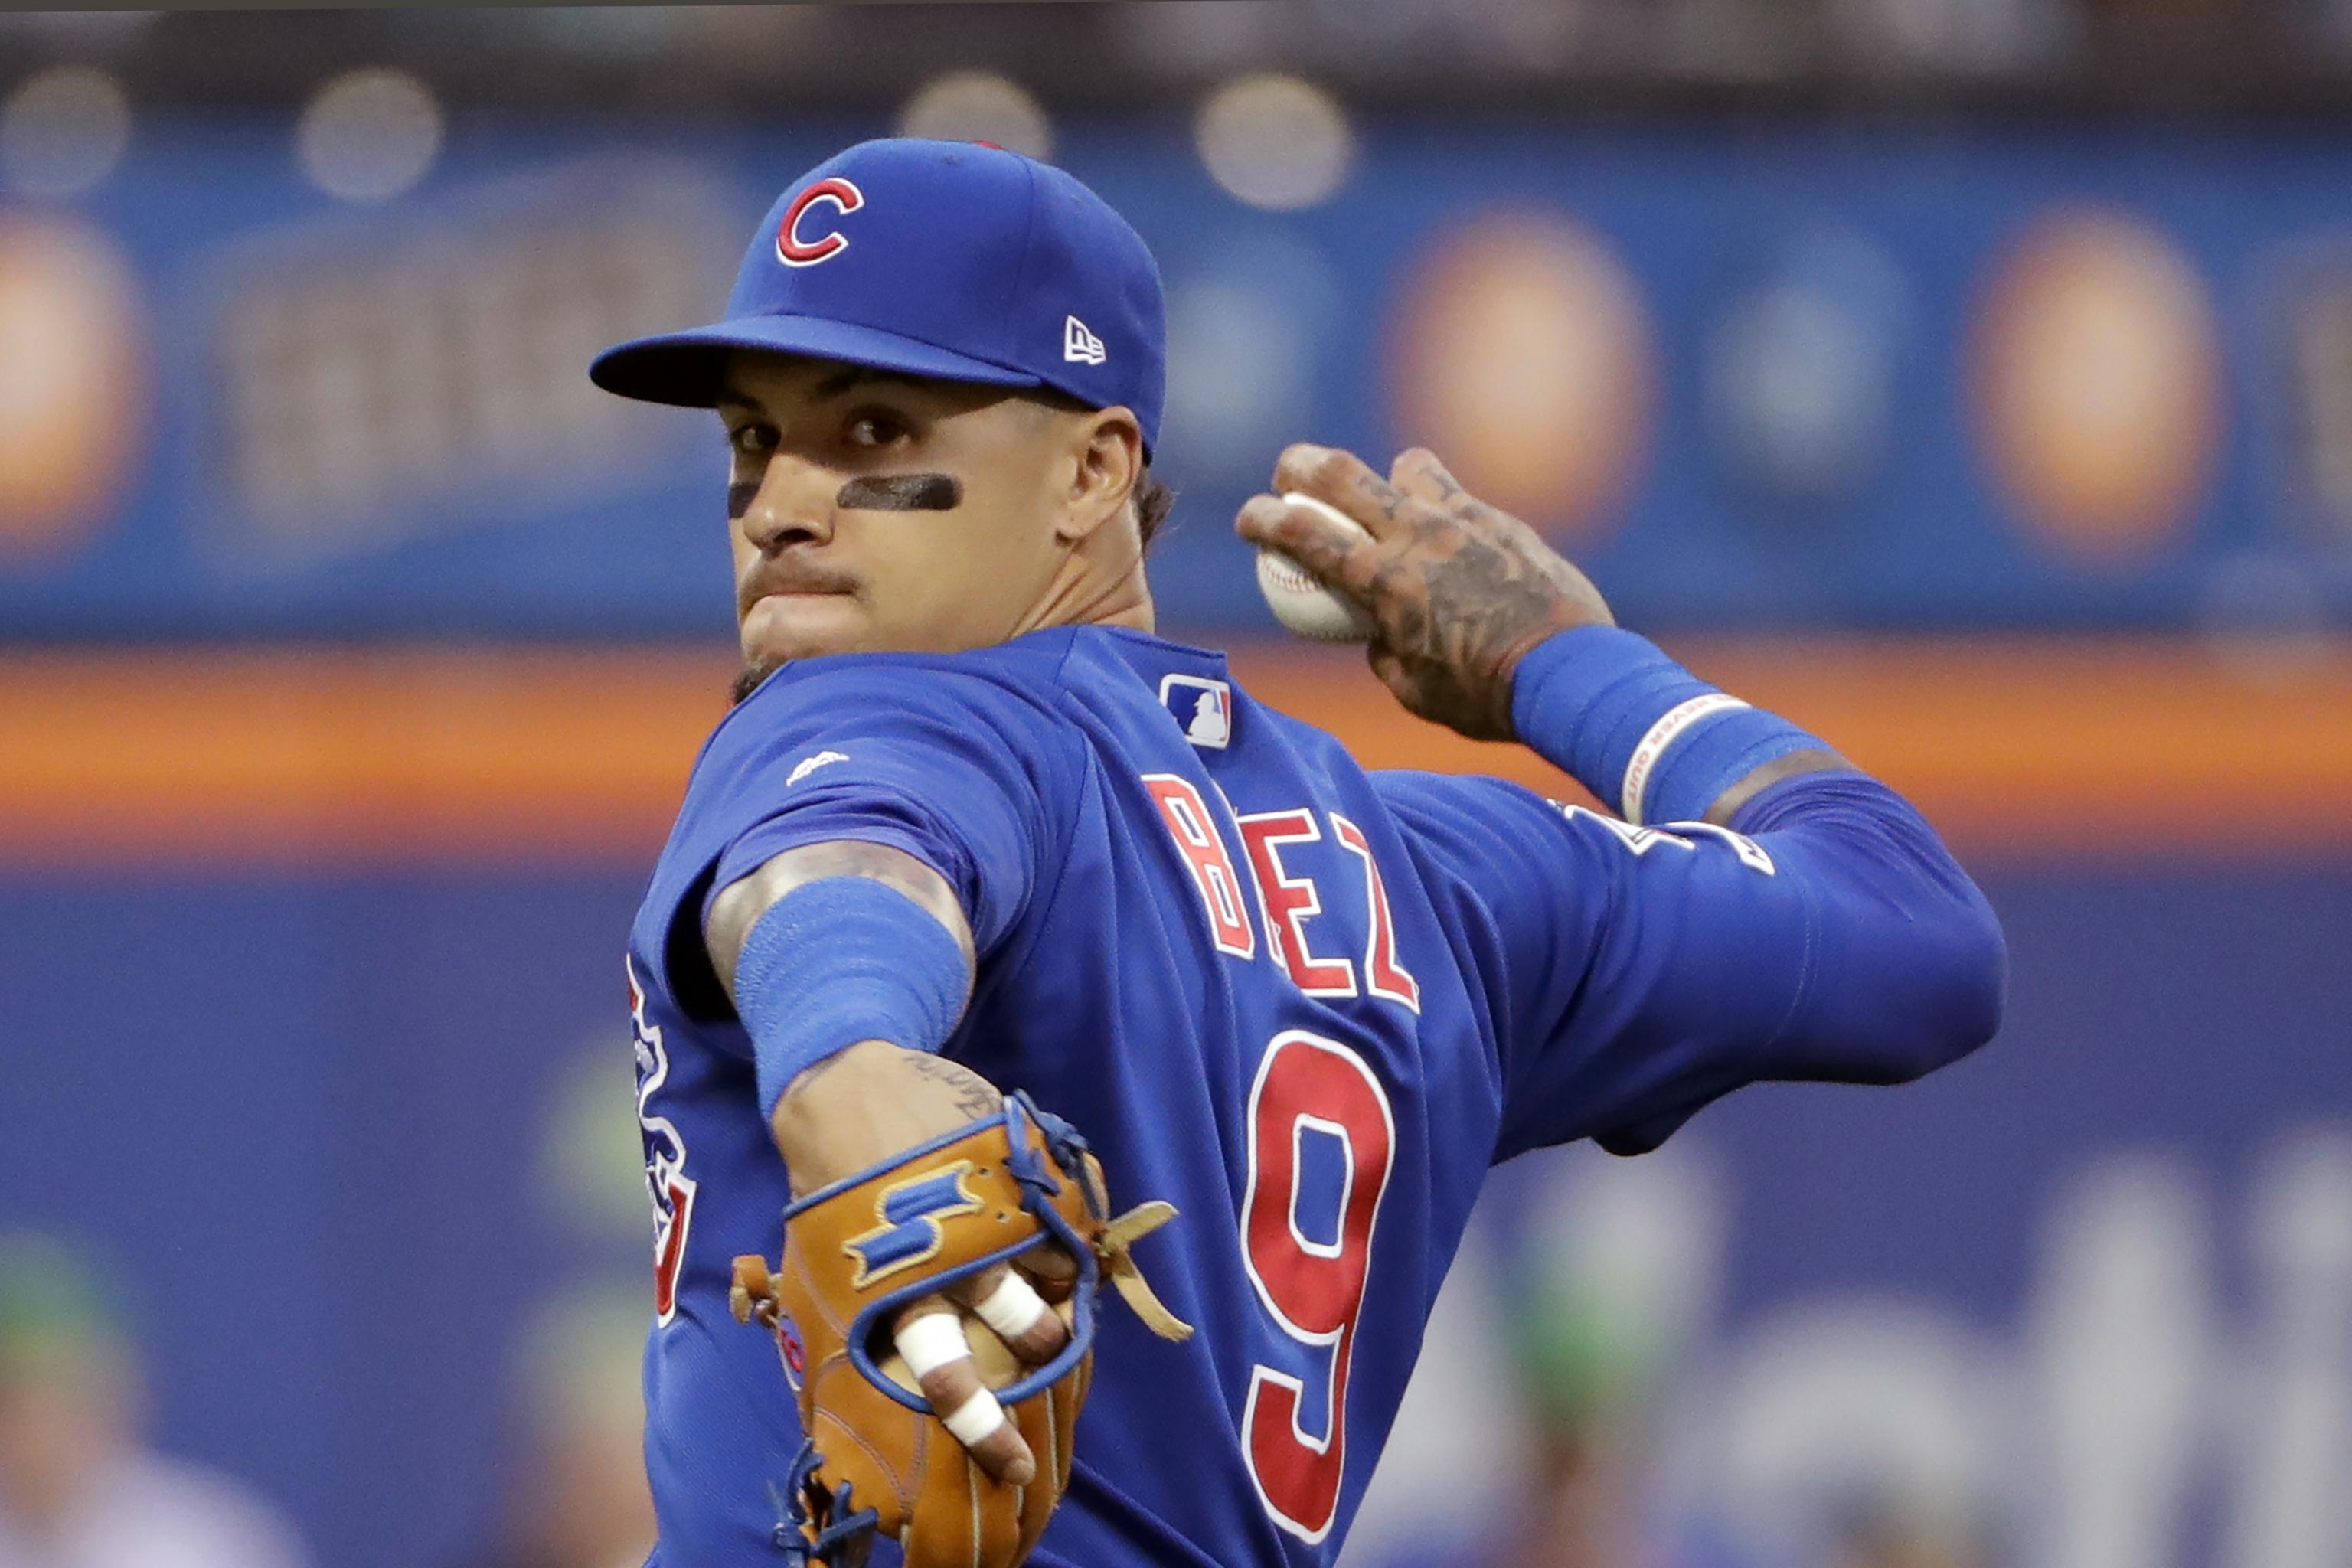 Javier Baez did it again with another web gem to live up to nickname